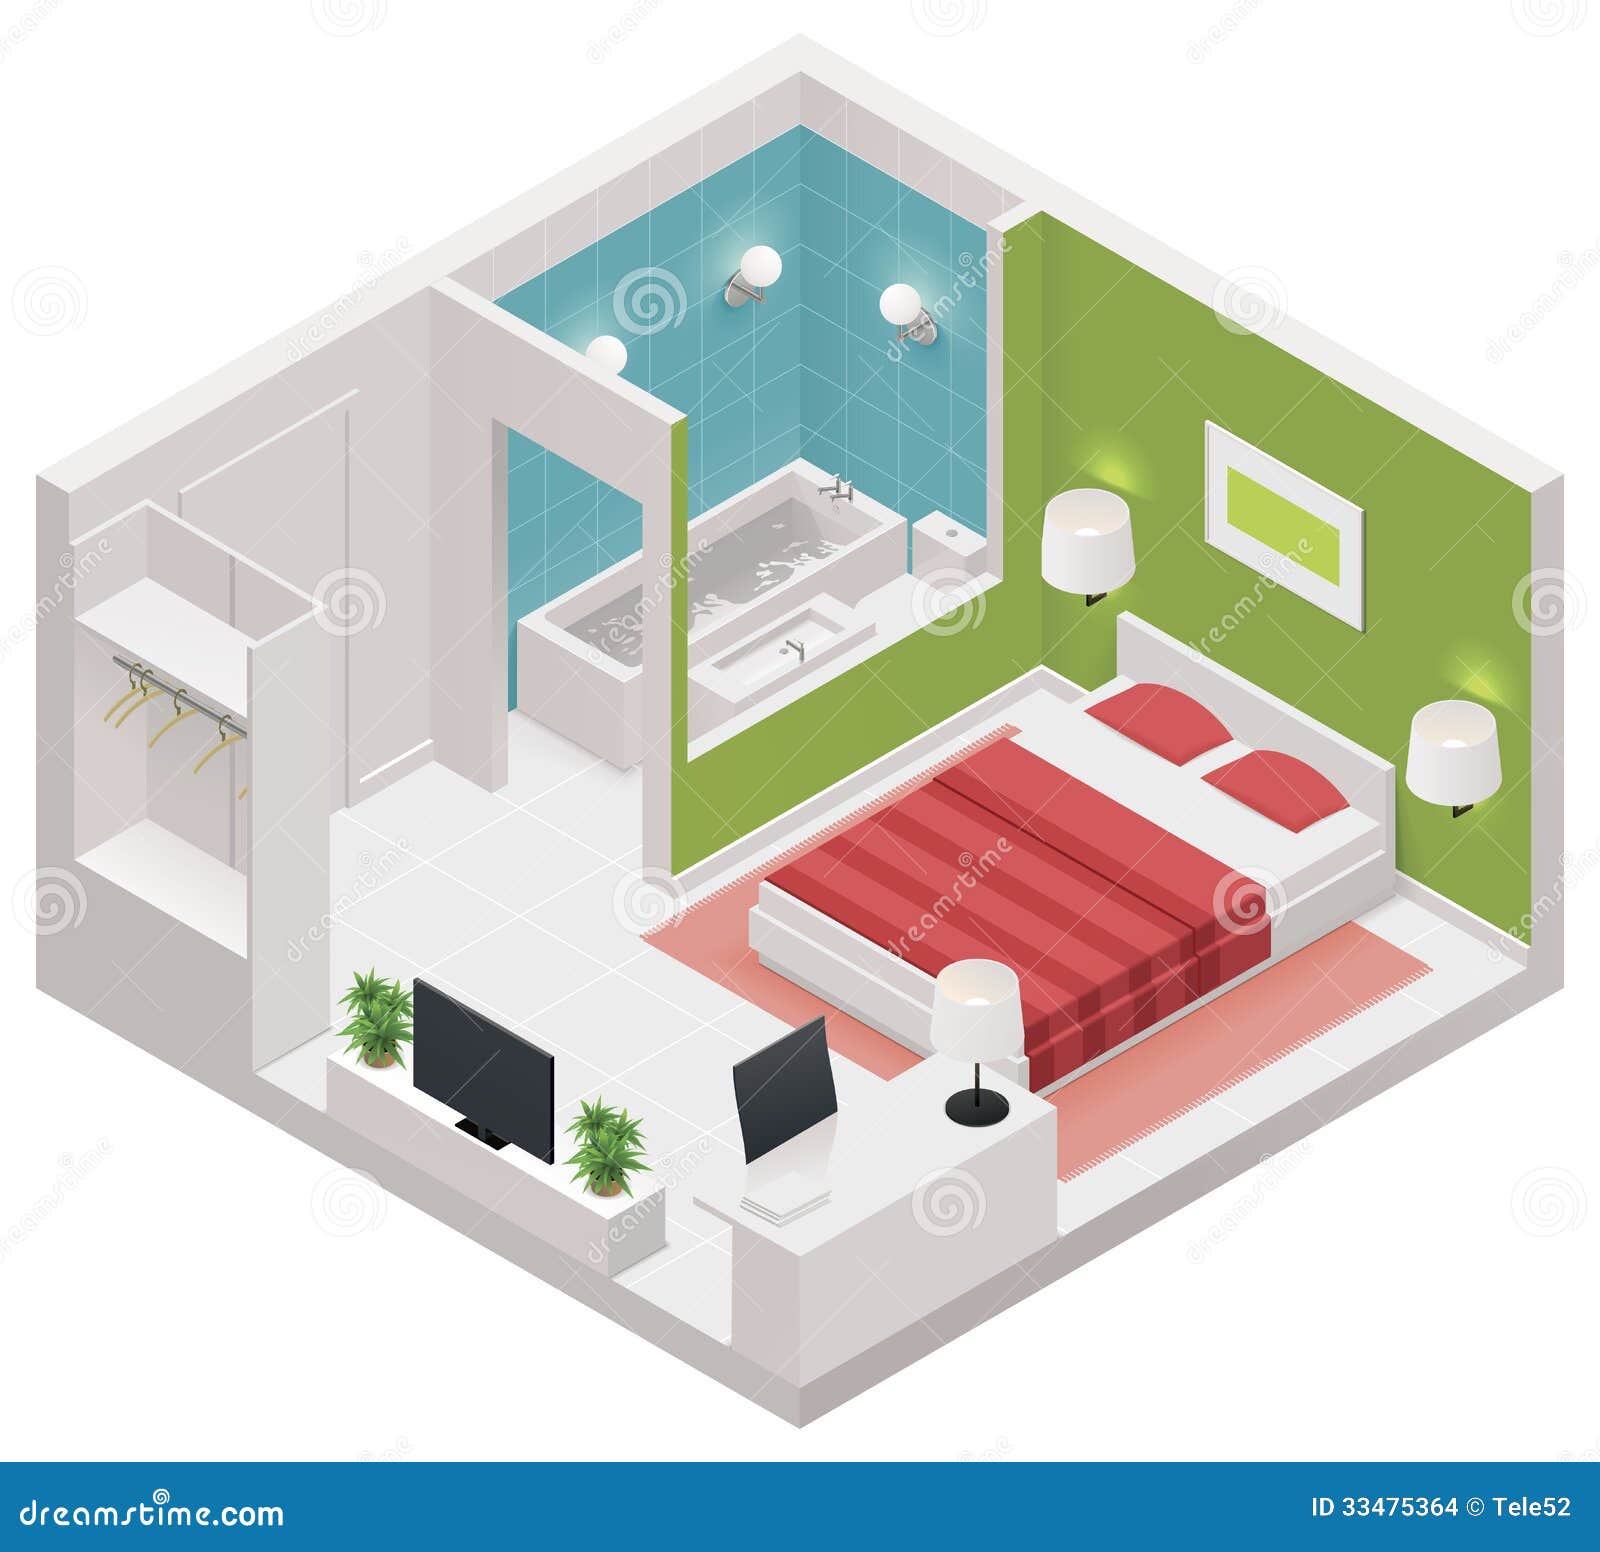 Vector Isometric Hotel Room Icon By Tele52 Via Dreamstime